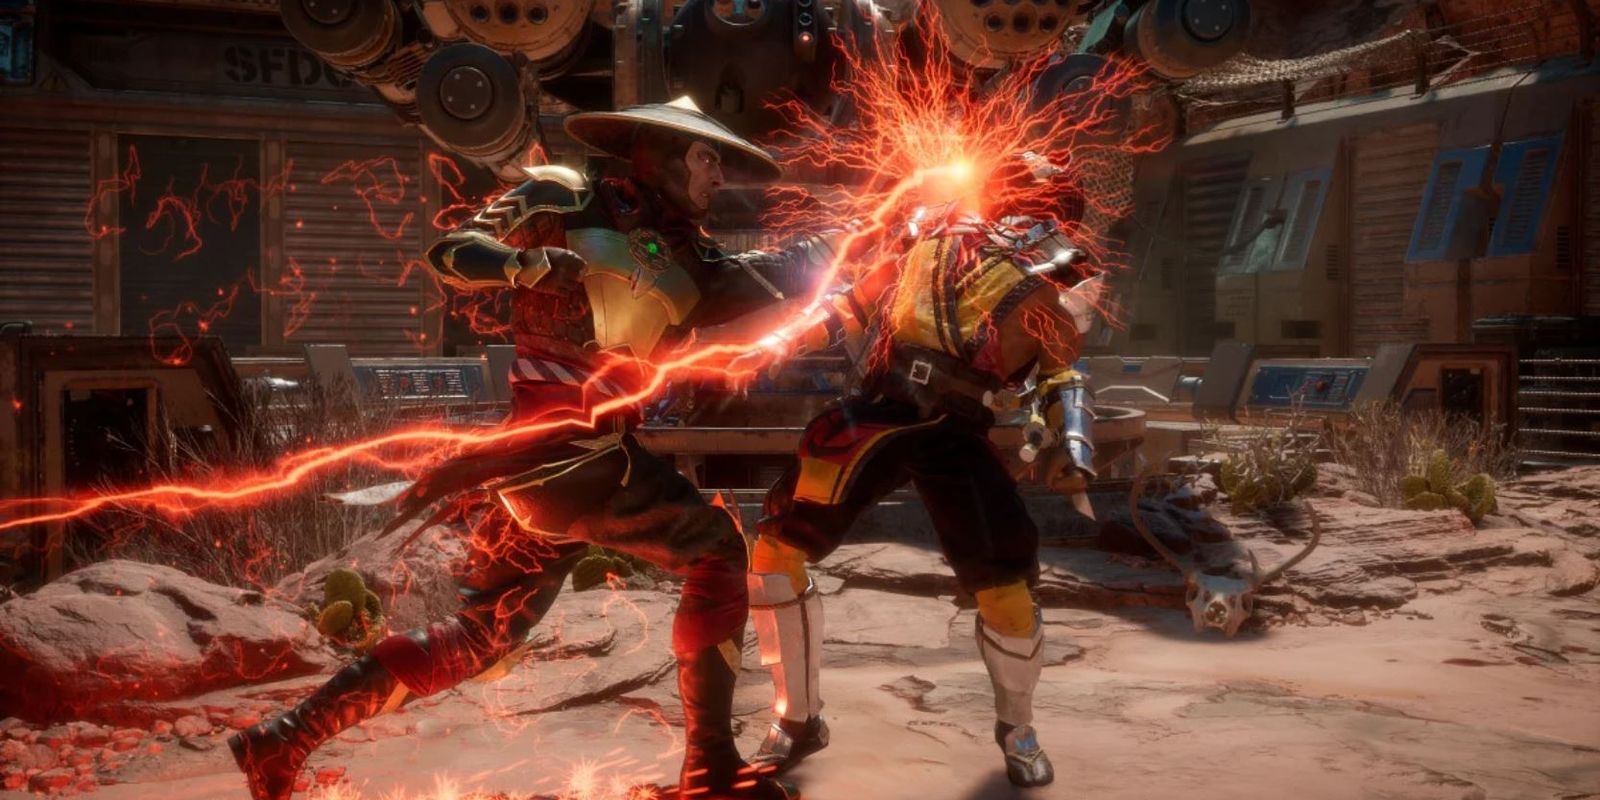 Mortal Kombat 1 Revealed, Confirmed To Be A Complete Reboot